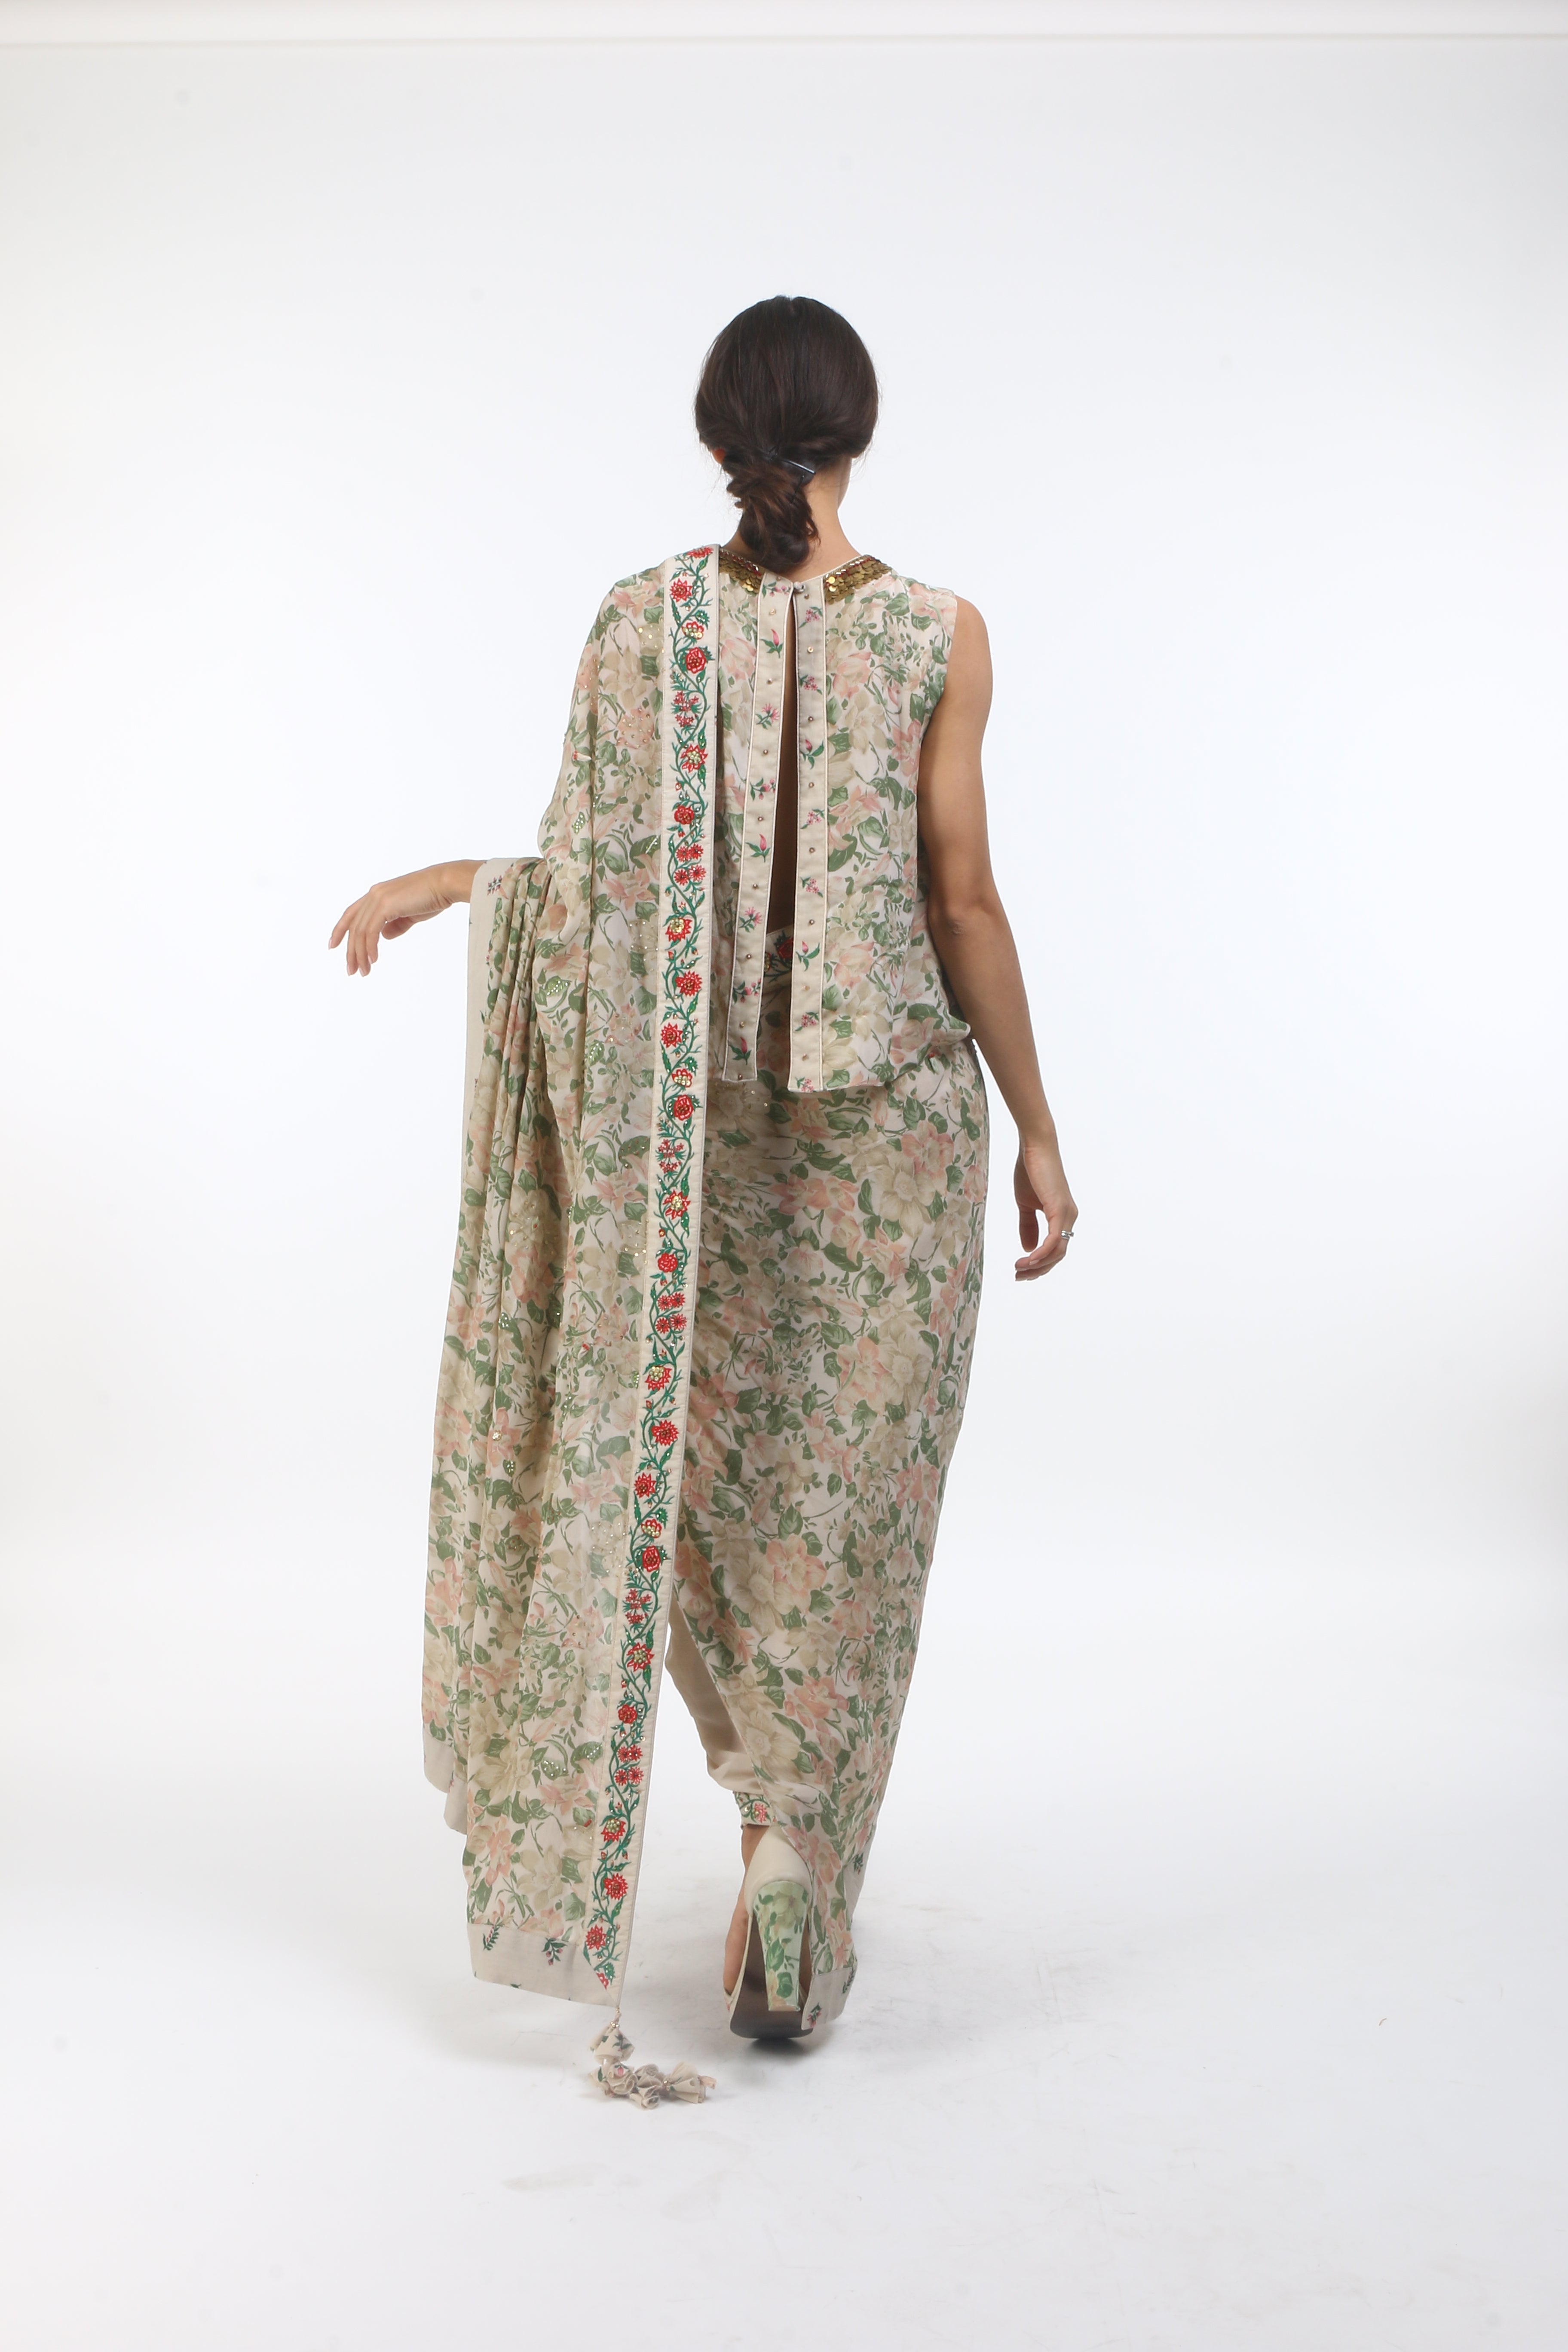 printed and embellished crepe dhoti saree with a back open blouse in layered coin embroidered neckline.